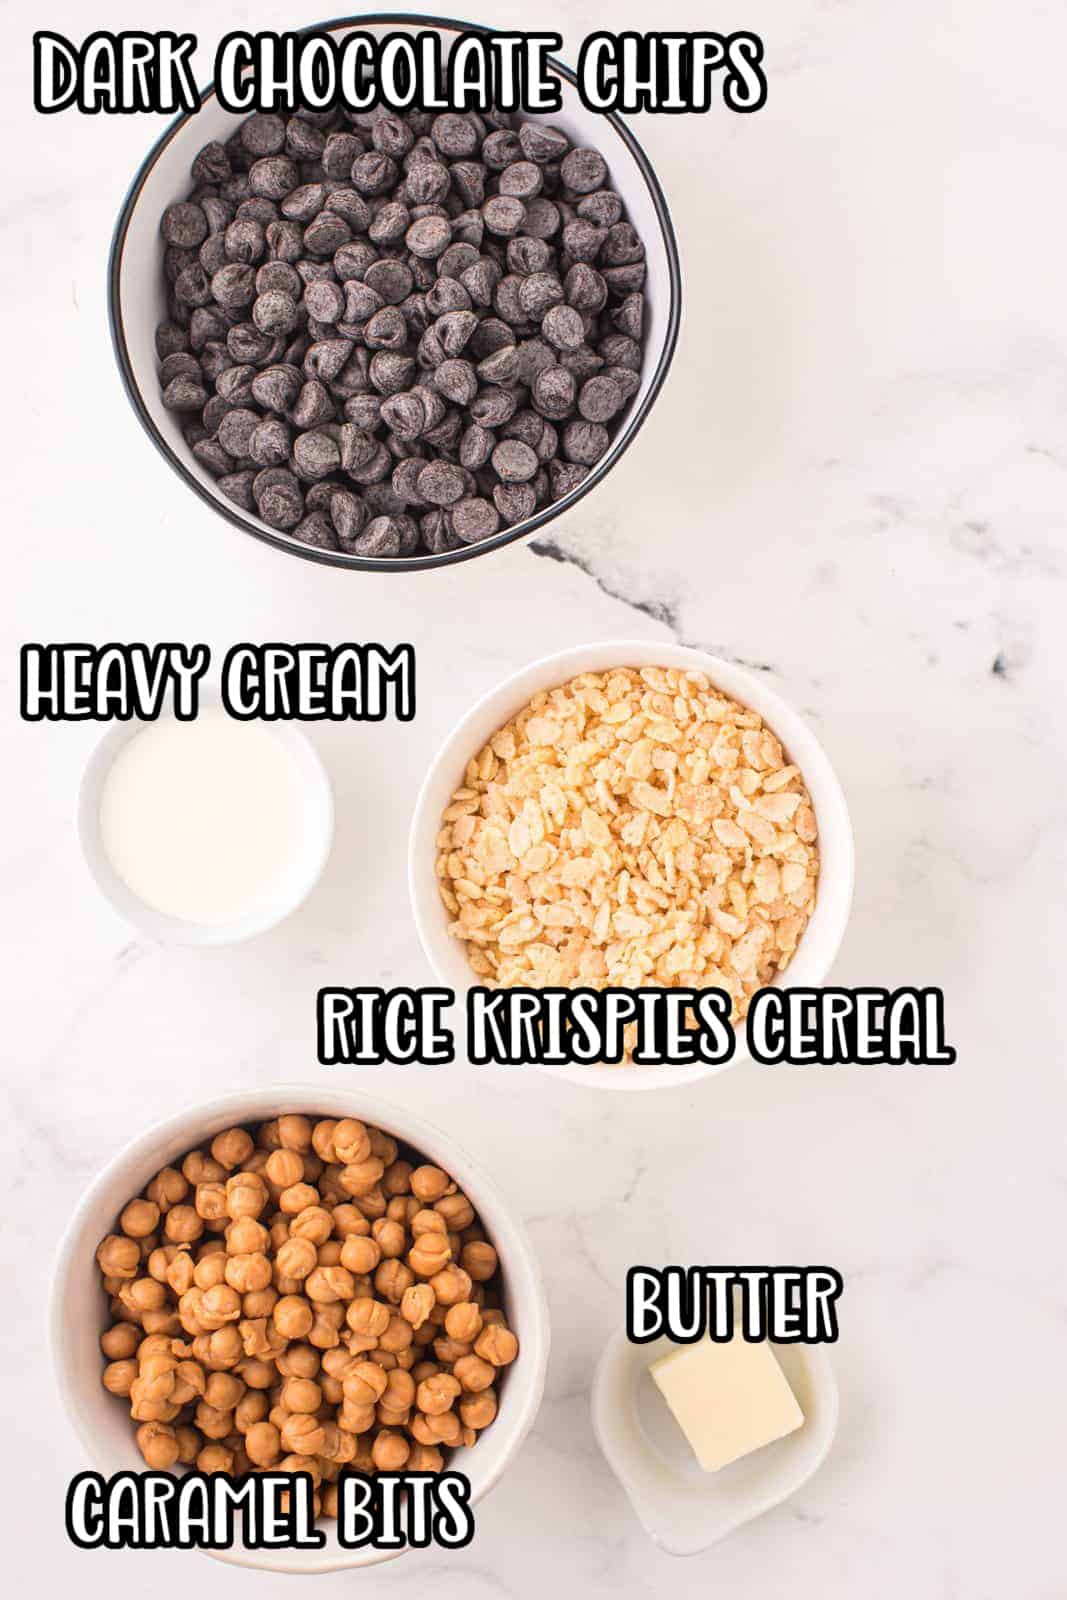 Dark chocolate chips, butter, Rice Krispie cereal, caramel bits, and heavy cream.